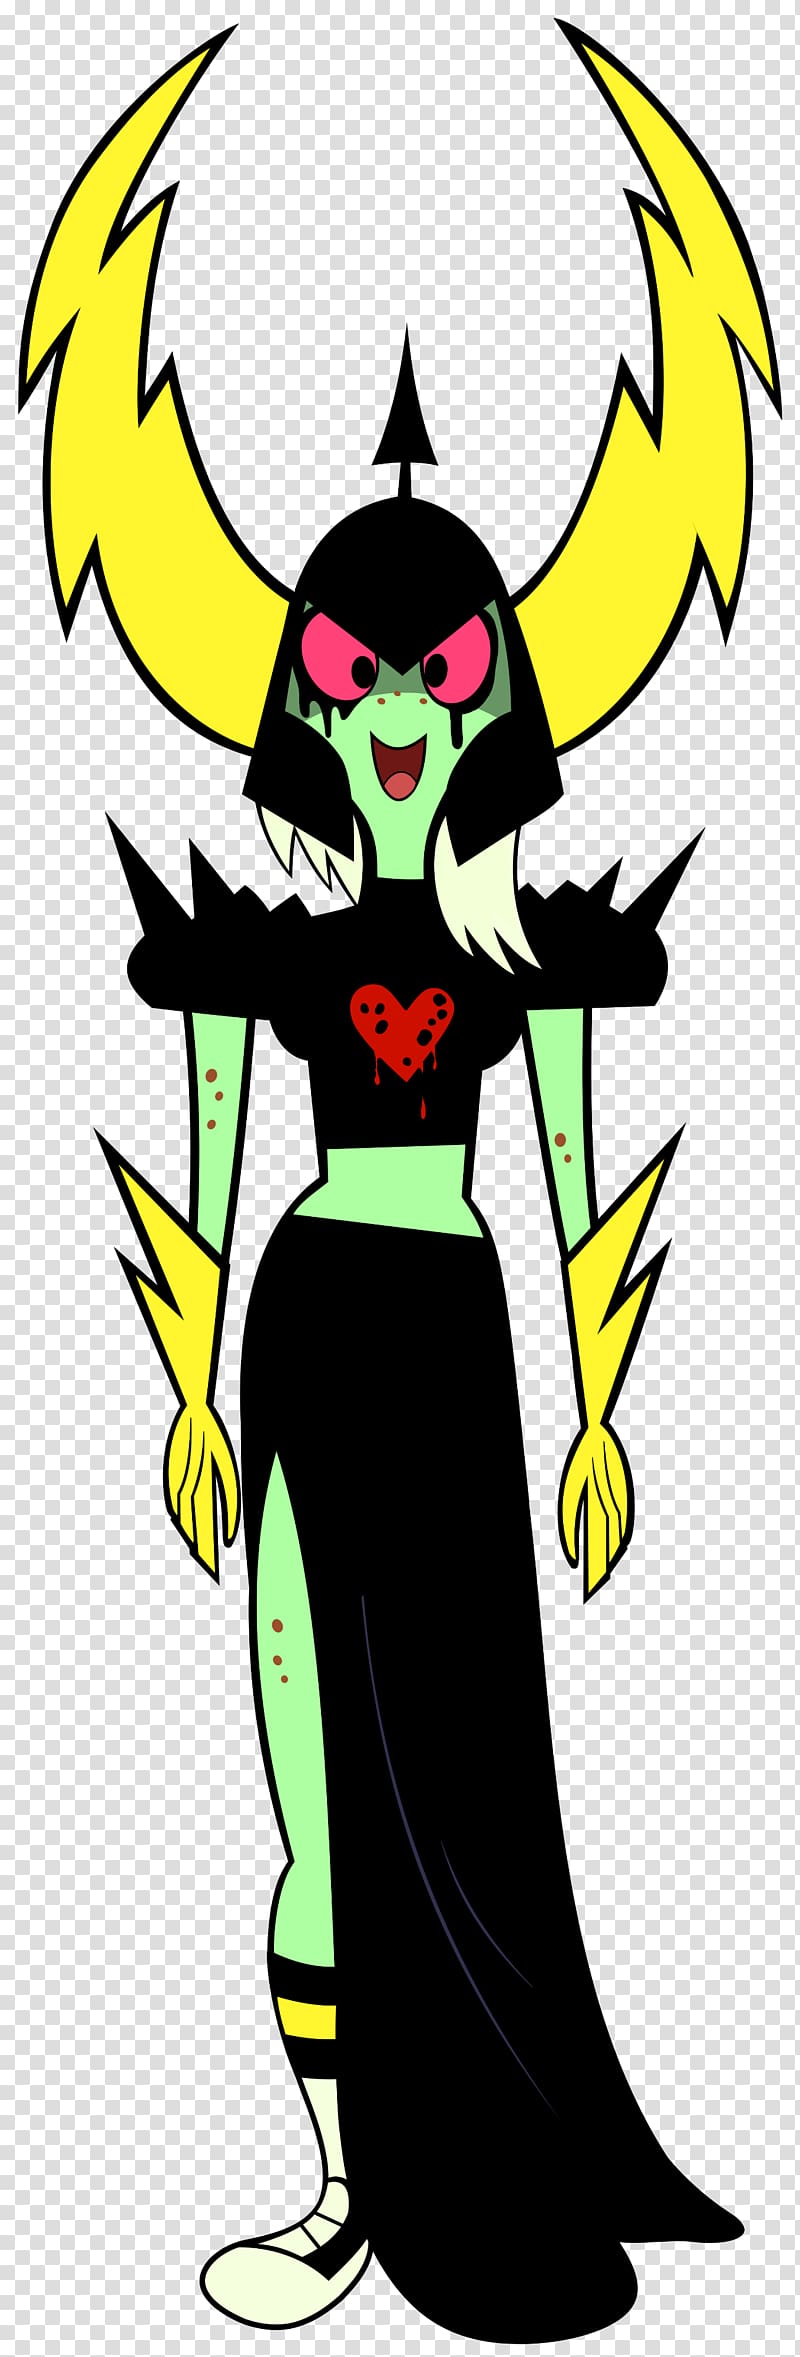 Lord Hater Commander Peepers Villain Disney XD Wikia, lord transparent background PNG clipart